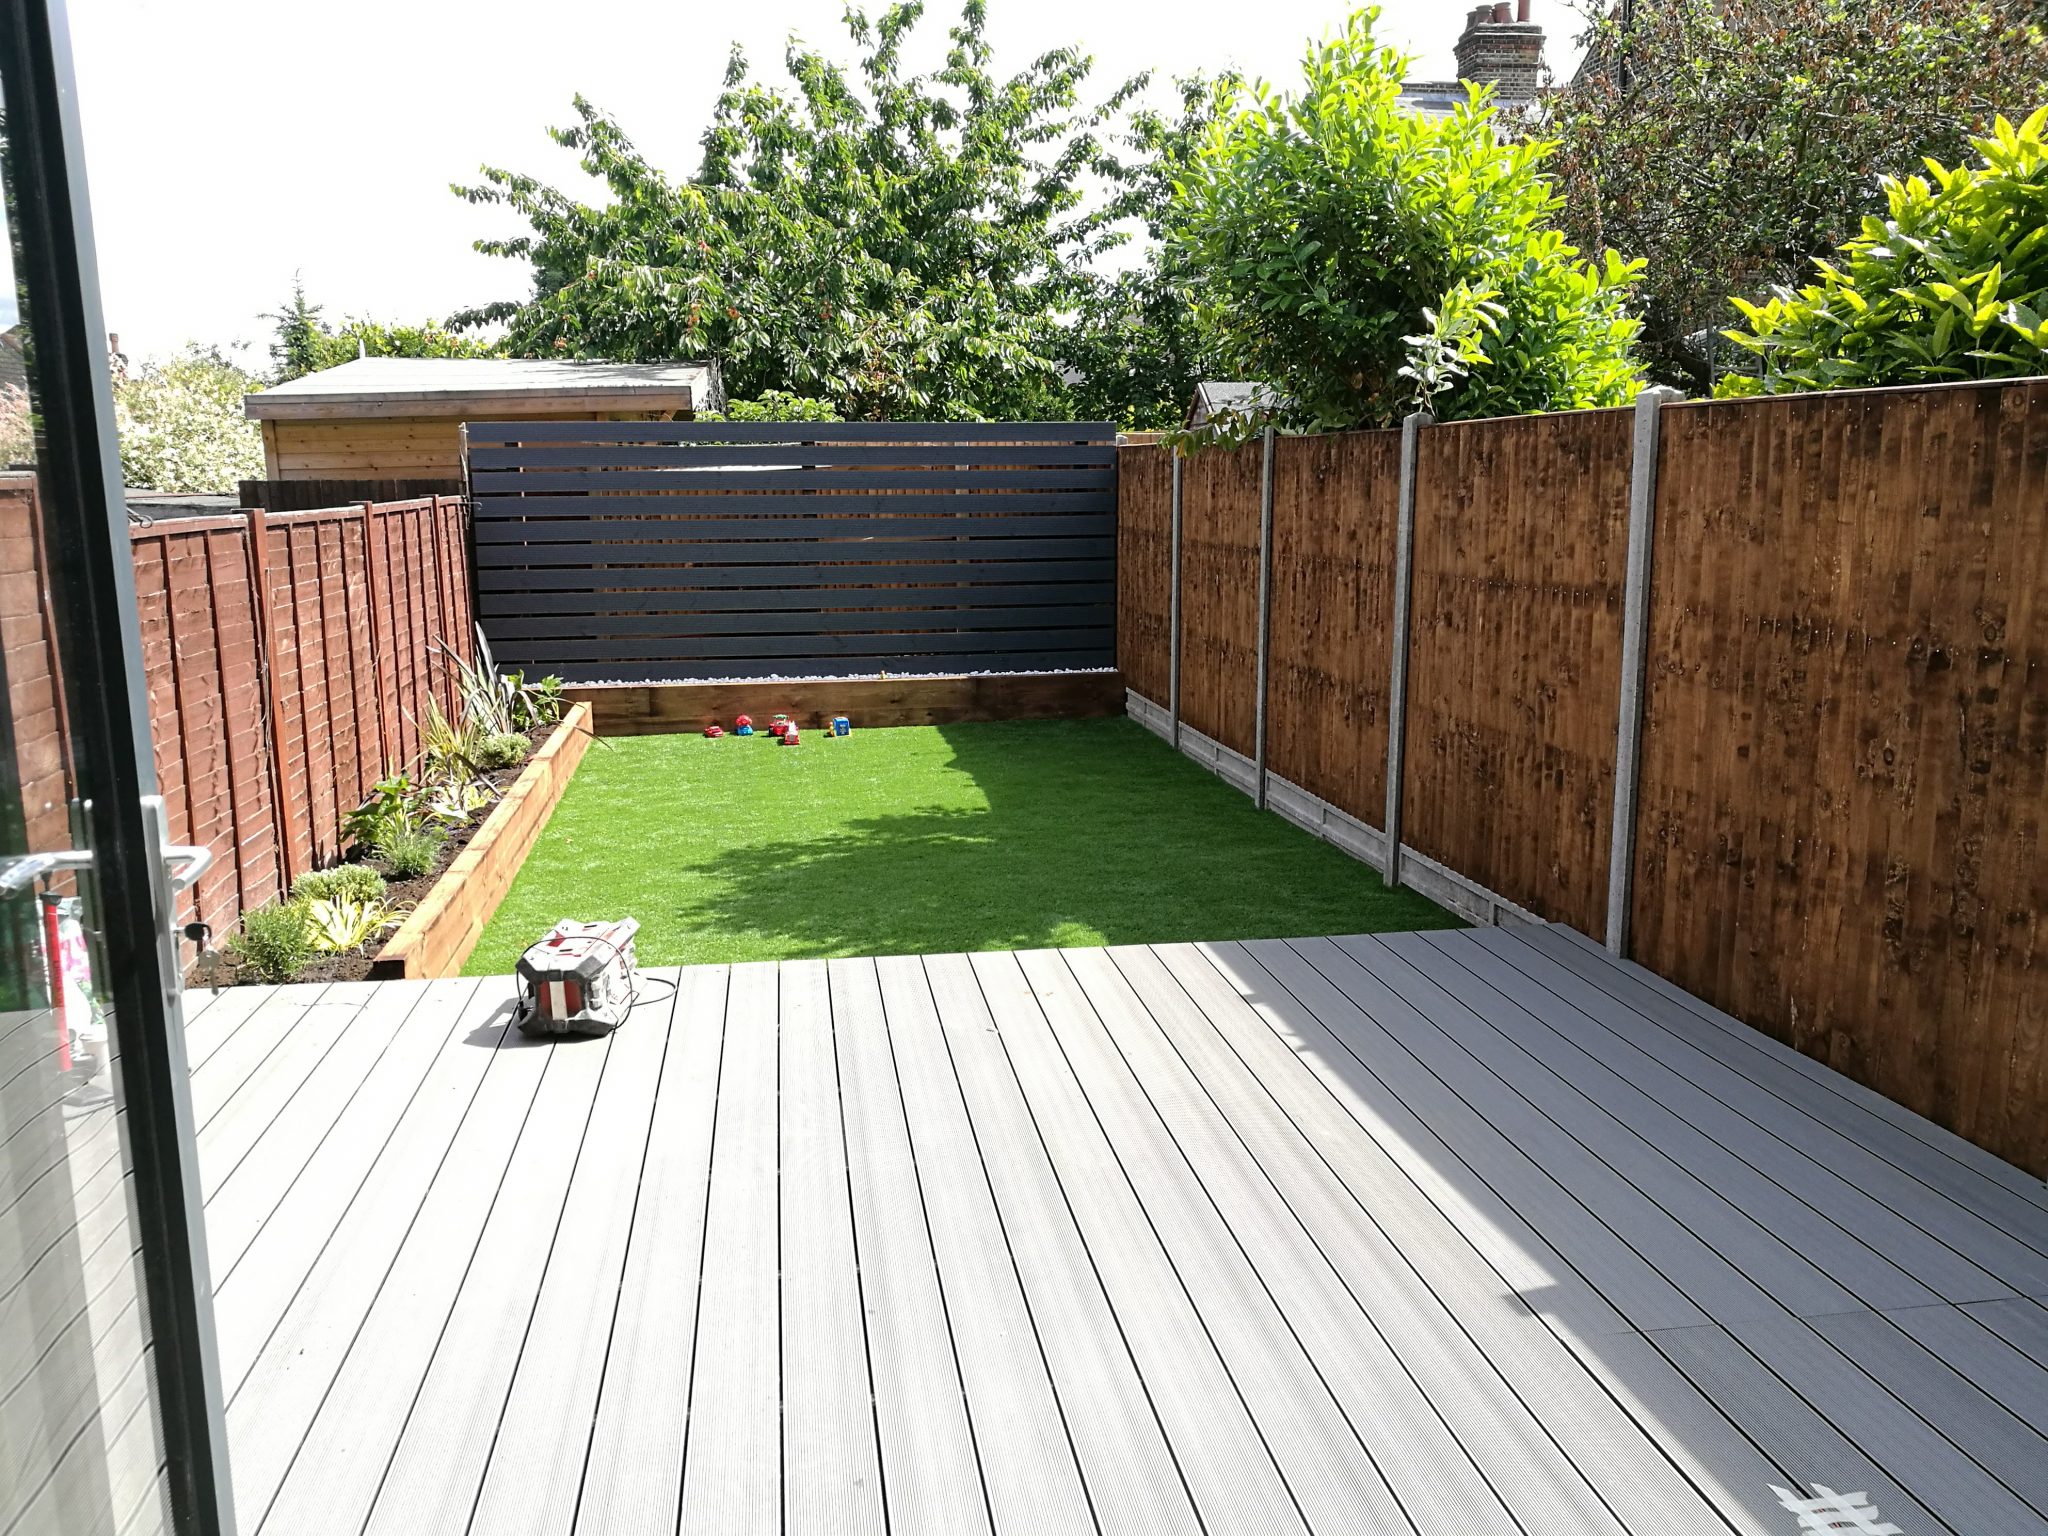 Decking and sleepers on border